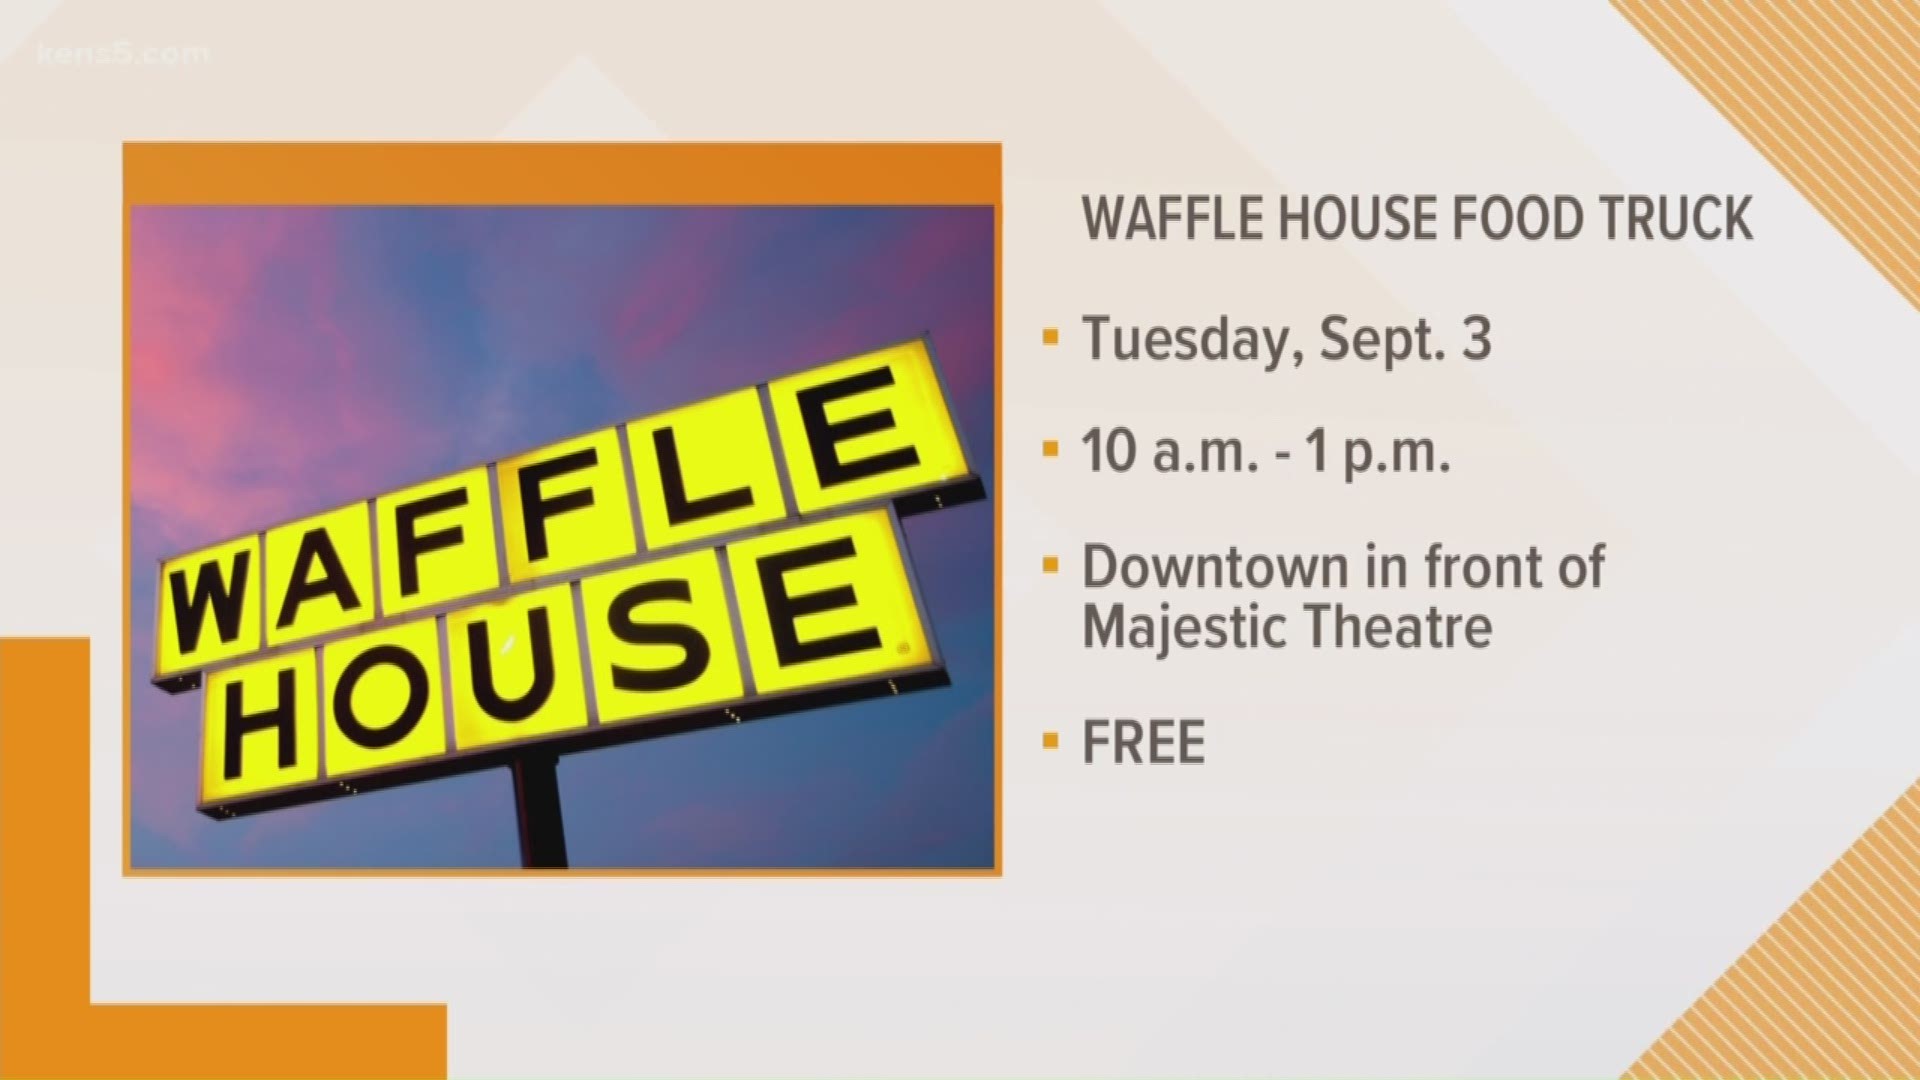 The Waffle House food truck is coming to San Antonio in celebration of National Waffle Week.